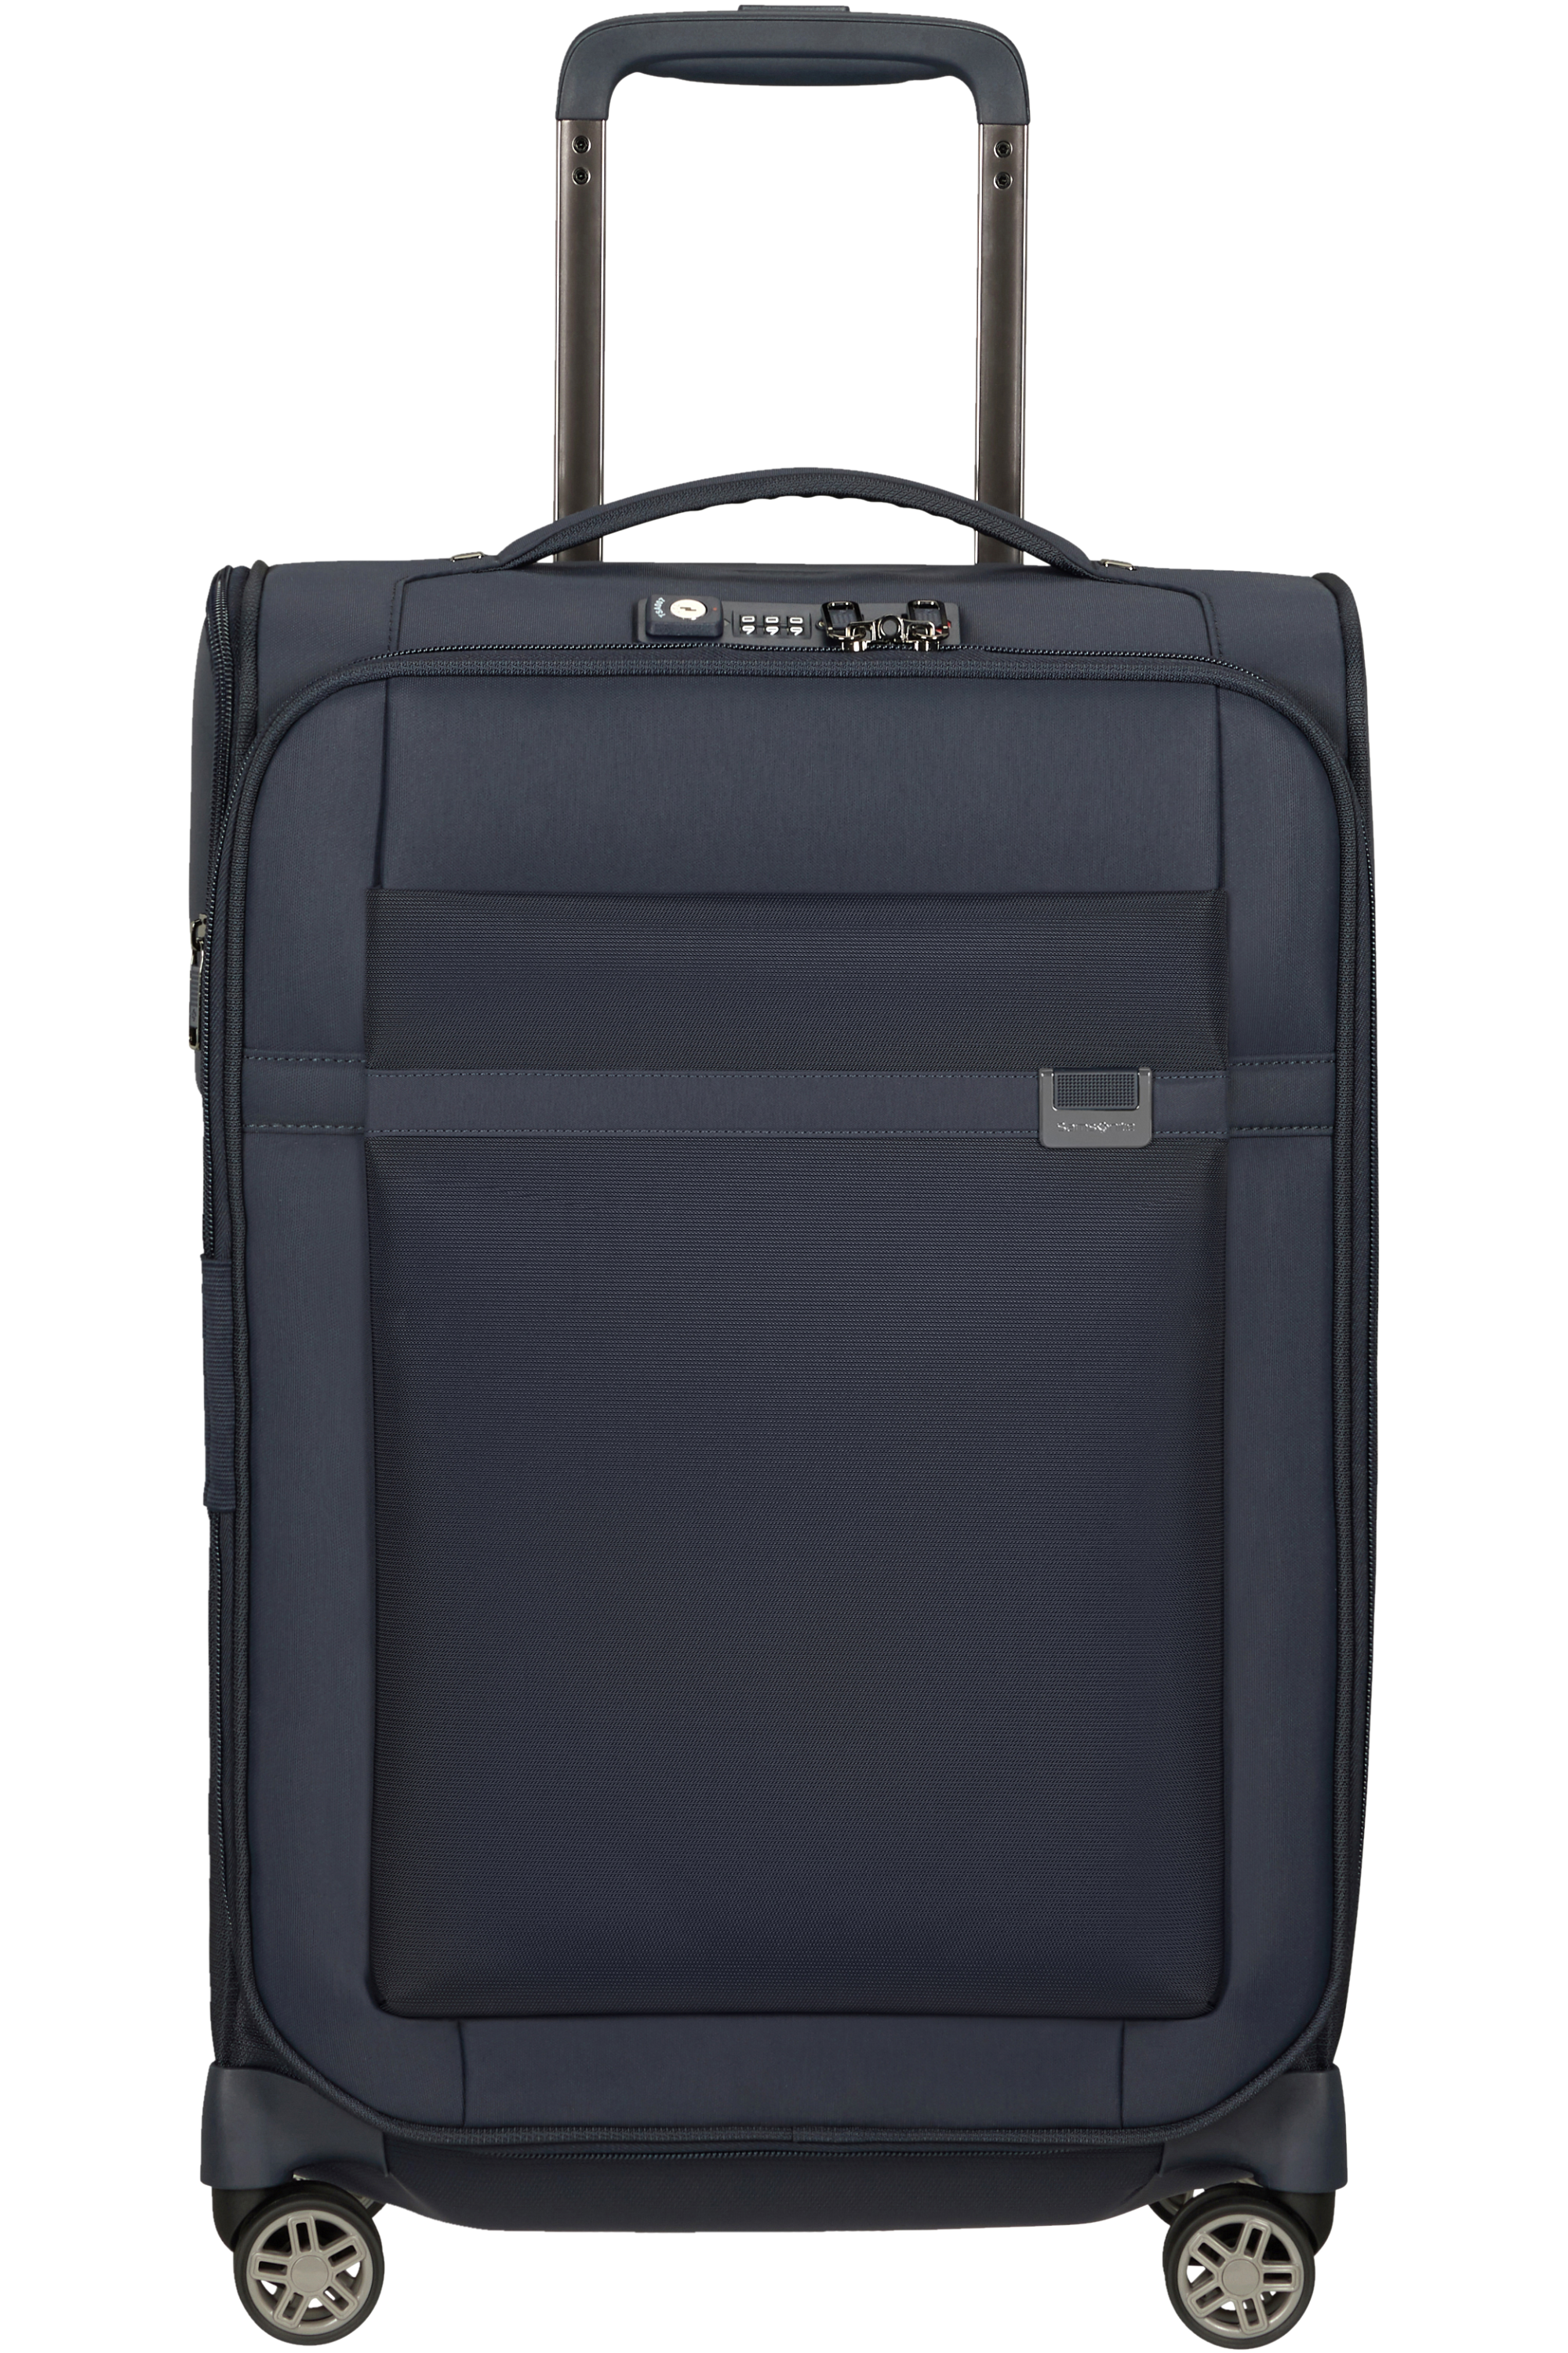 Samsonite Airea Spinner Four-wheel Suitcase 78cm in Black Womens Bags Luggage and suitcases 